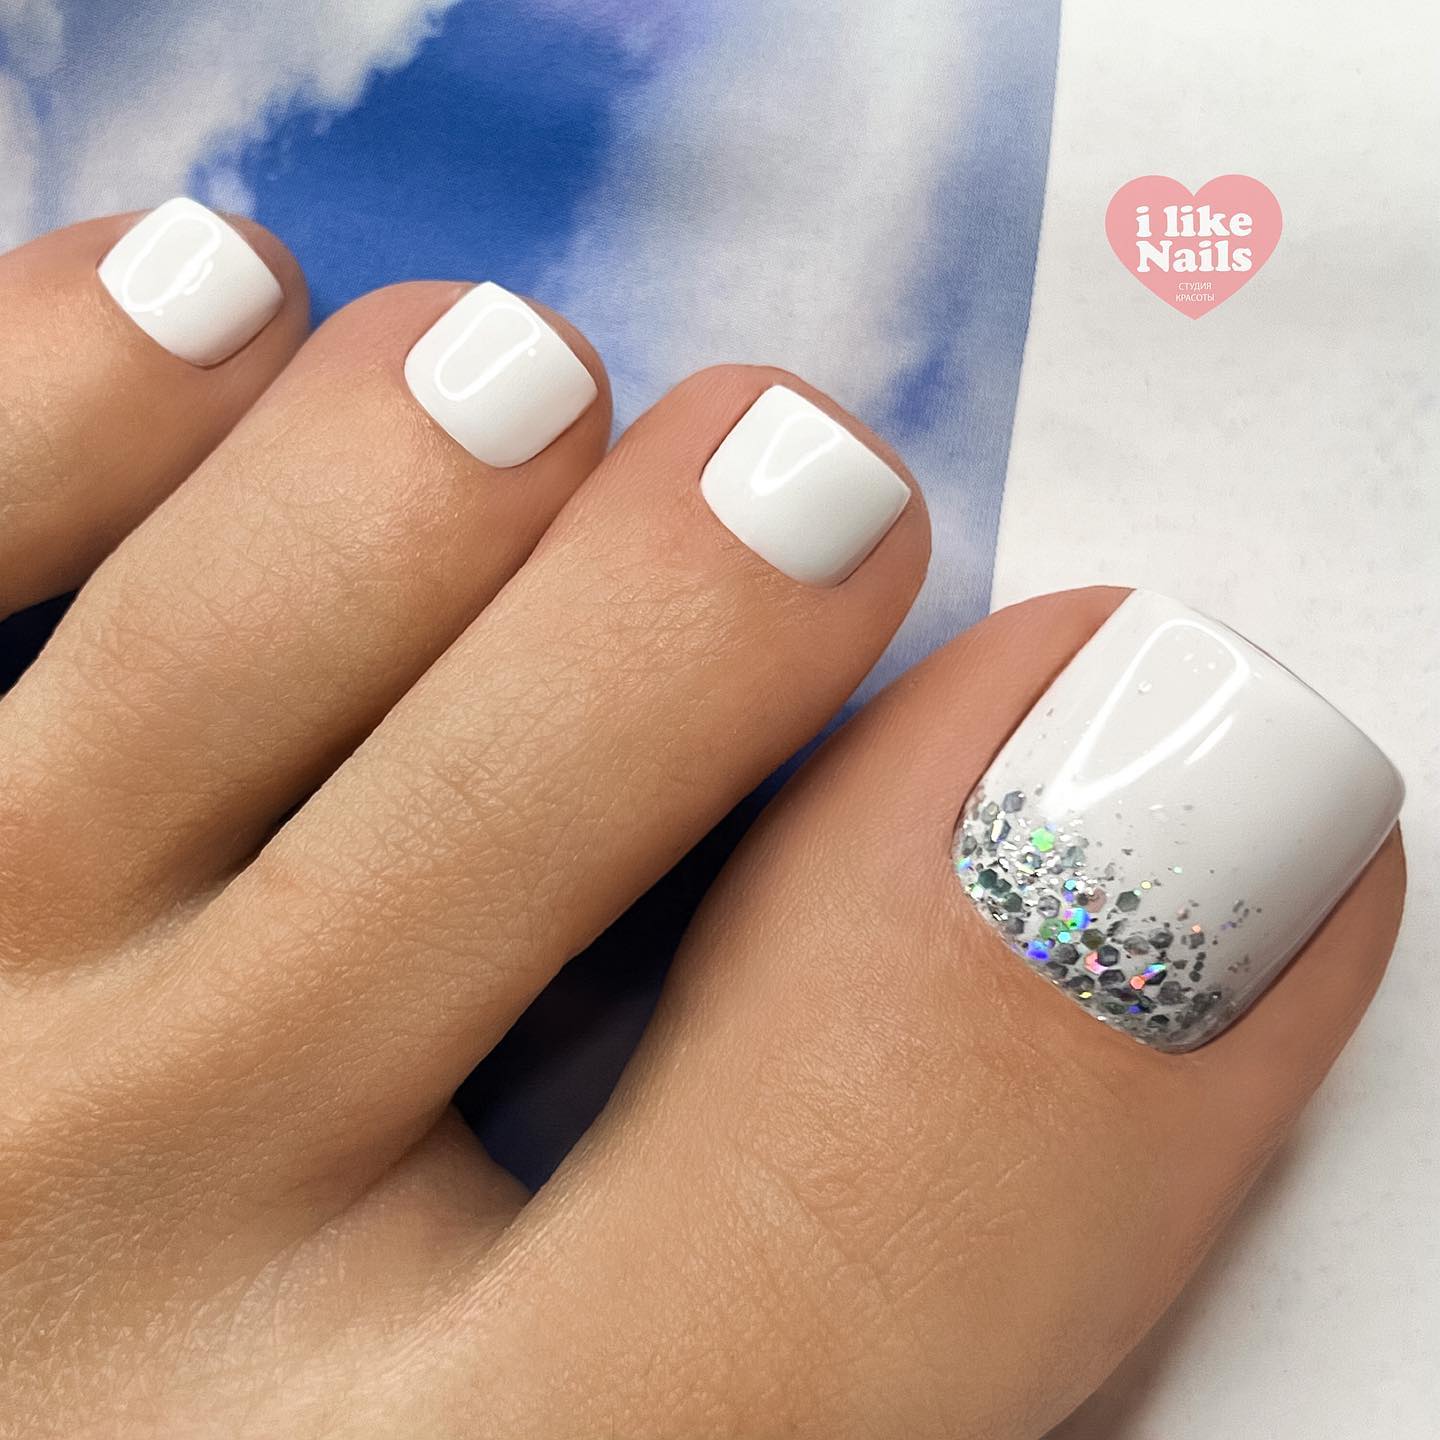 60+ Dazzling Summer Pedicure Ideas for More Fun in the Sun - Hairstylery